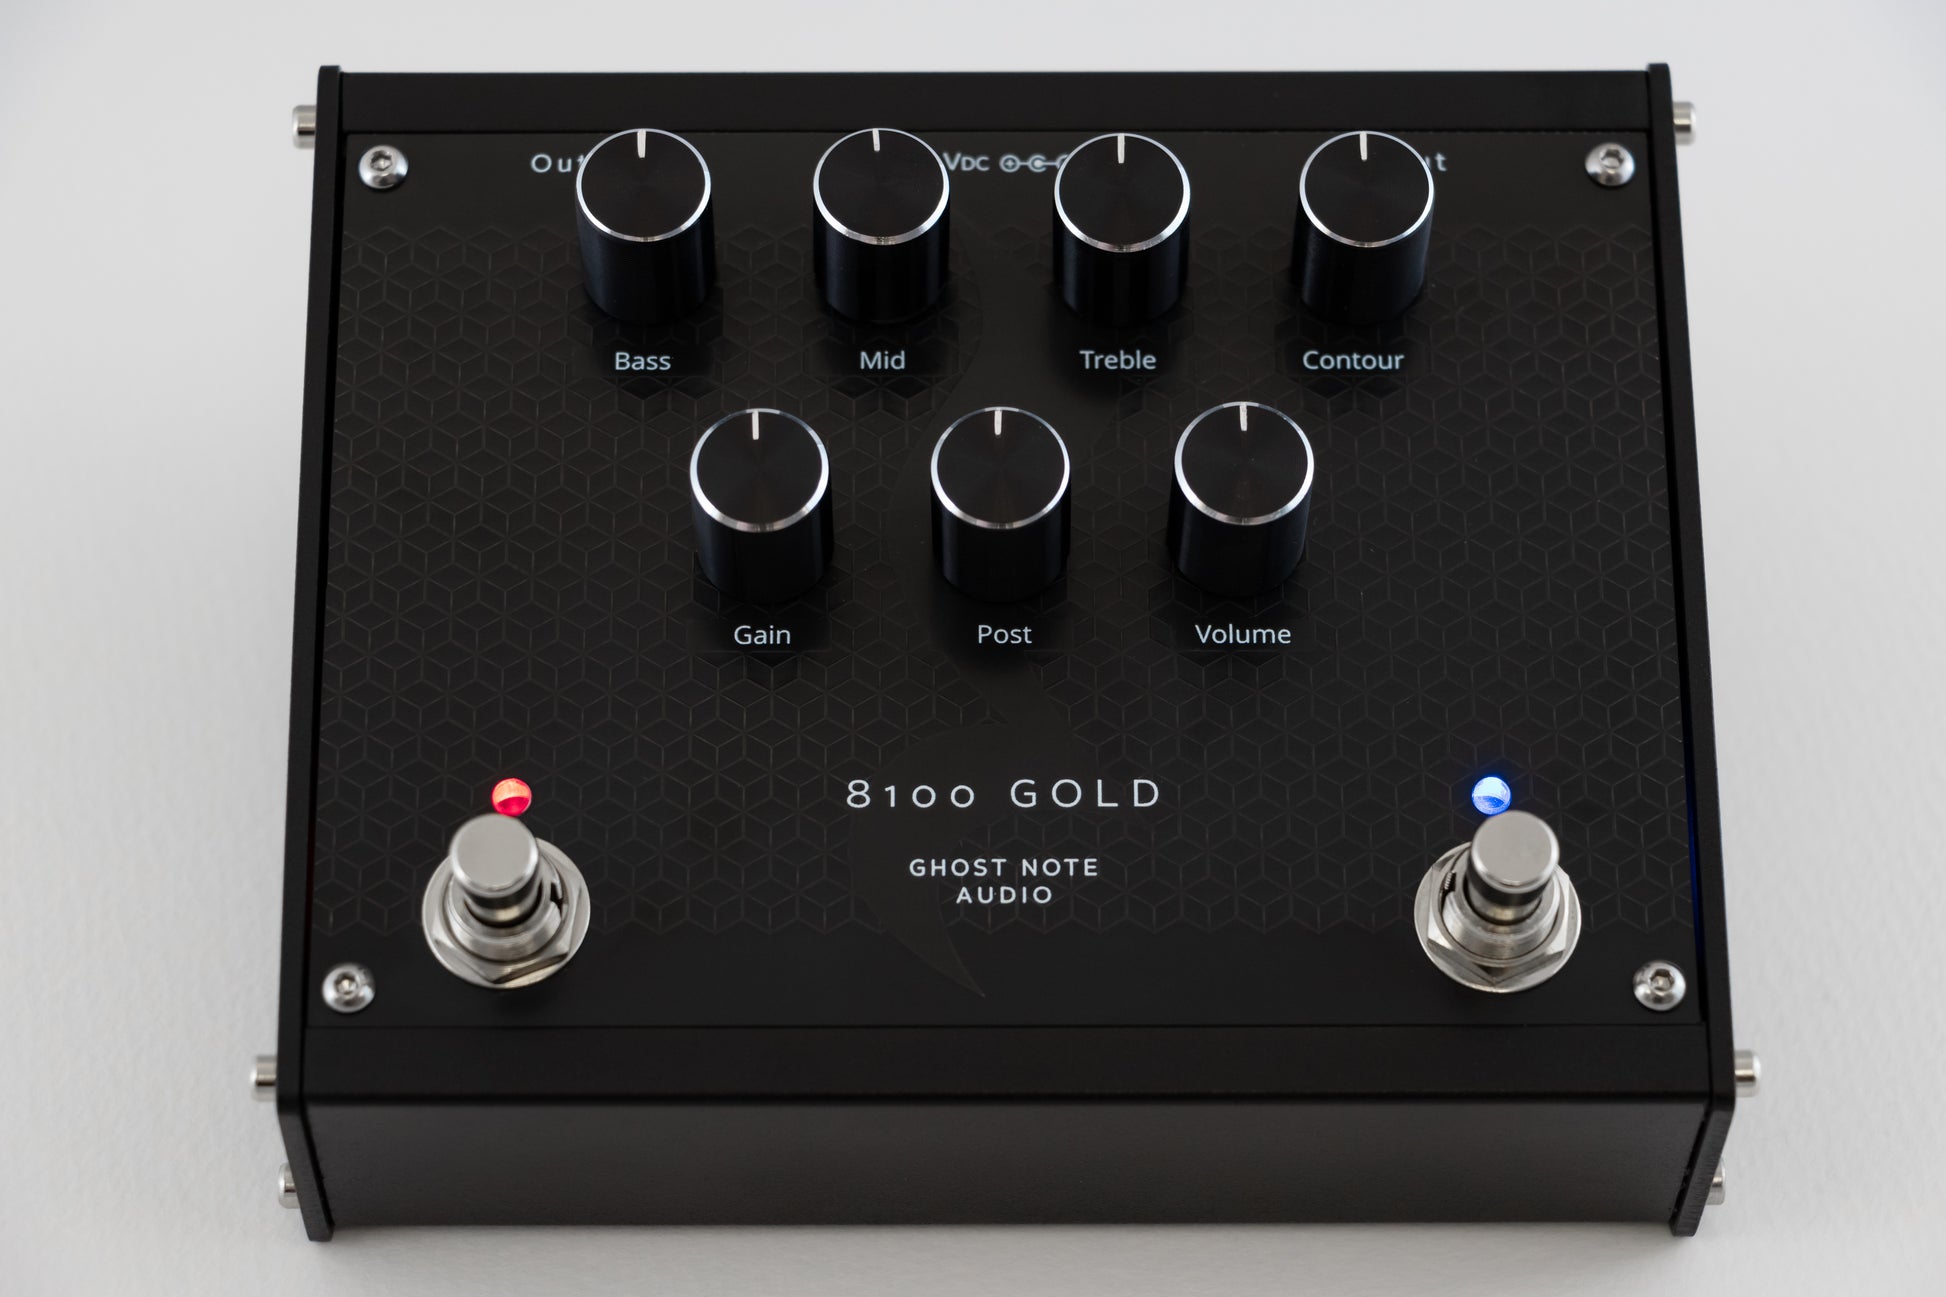 8100 Gold Preamp Pedal from Ghost Note Audio. - Photograph